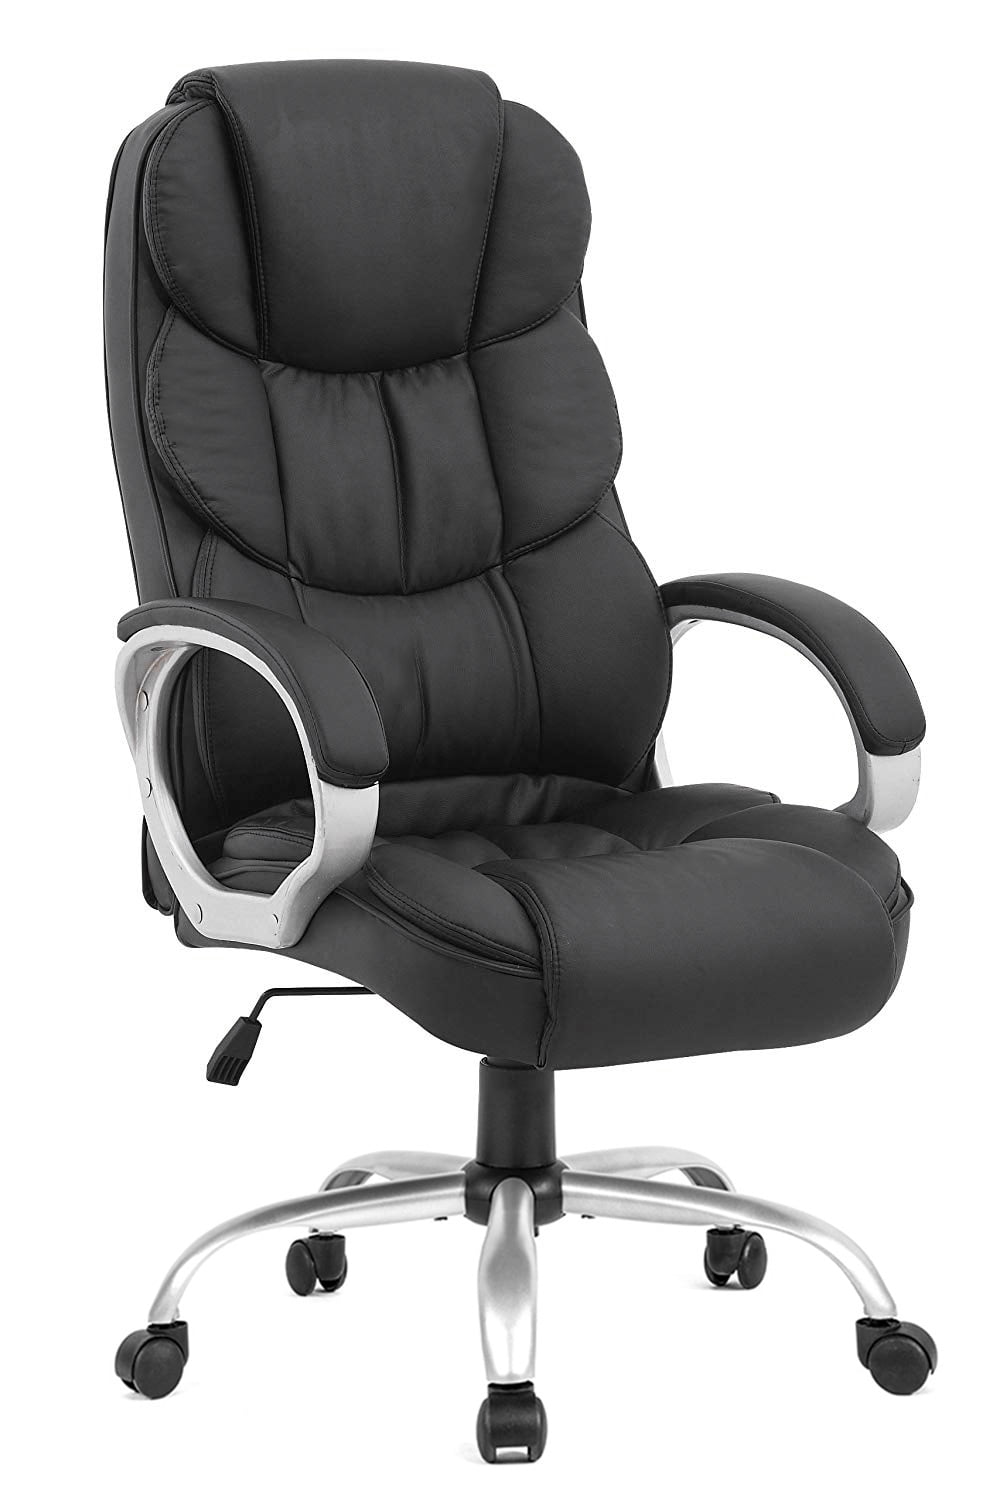 Ergonomic Massage Office Chair High Back Black PU Leather Heating Vibr –  Purely Relaxation